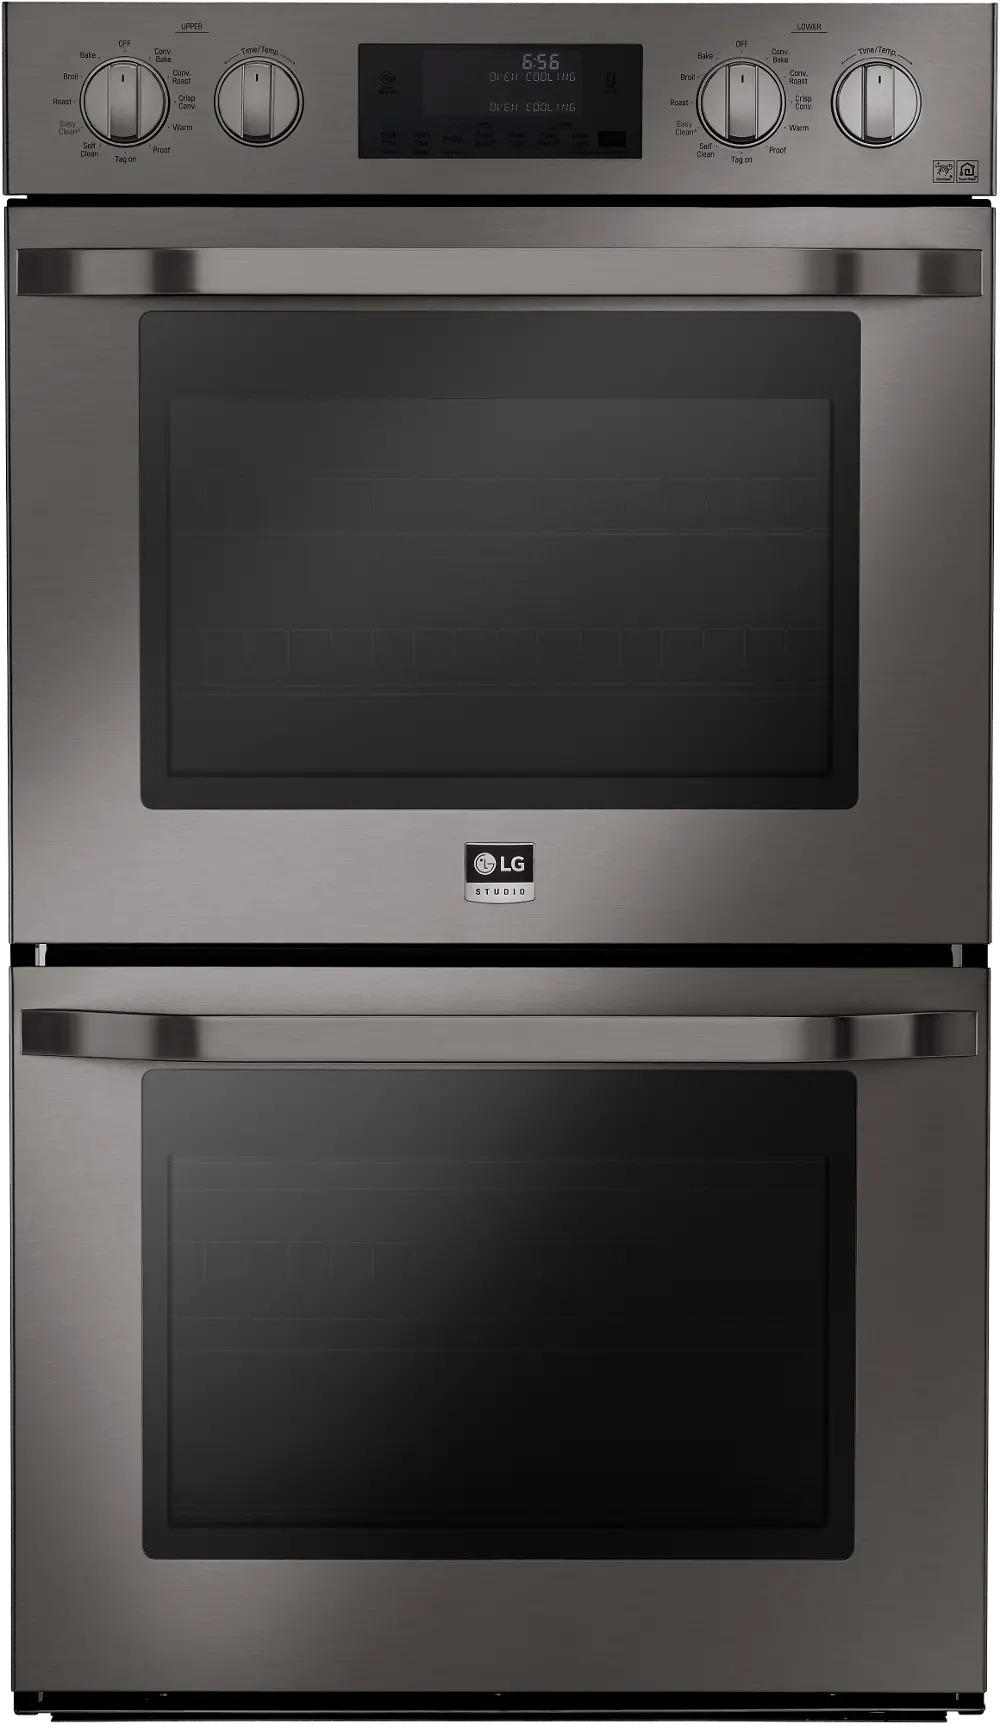 LSWD309BD LG STUDIO 30 Inch Double Wall Oven - 9.4 cu. ft. Black Stainless Steel-1